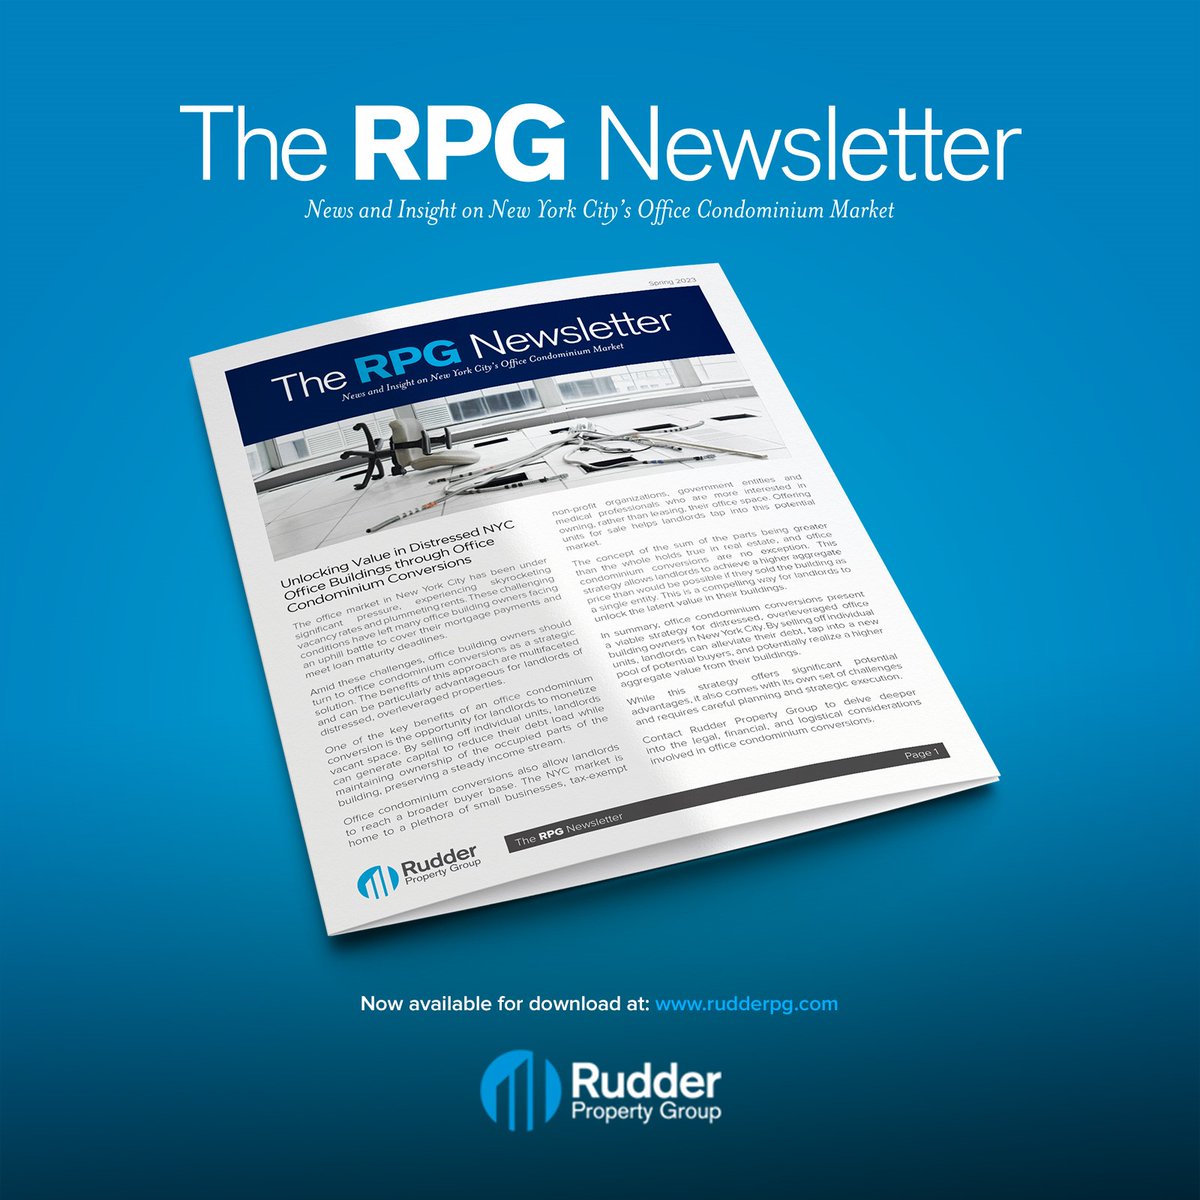 Check out the RPG Newsletter – Spring 2023

Unlocking Value in Distressed NYC Office Buildings through Office Condominium Conversions

rpgpublications.com/RPG_Newsletter…

#RPG #RPGNewsletter #OficeCondo #Conversions #OwnYourFuture #CRE #NYCRealEstate